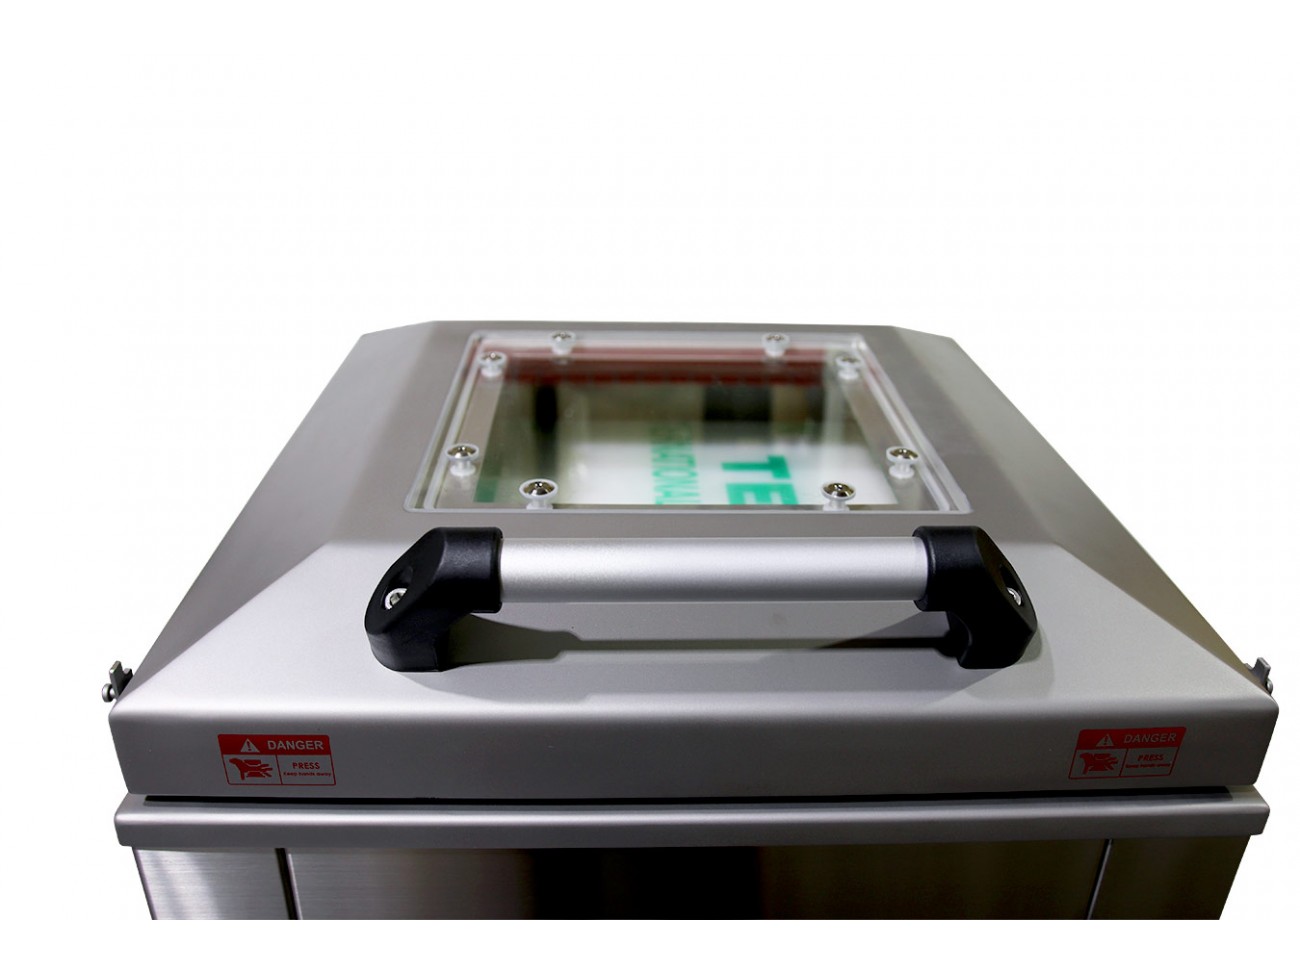 CHTC-420LR - Tabletop Chamber Sealers